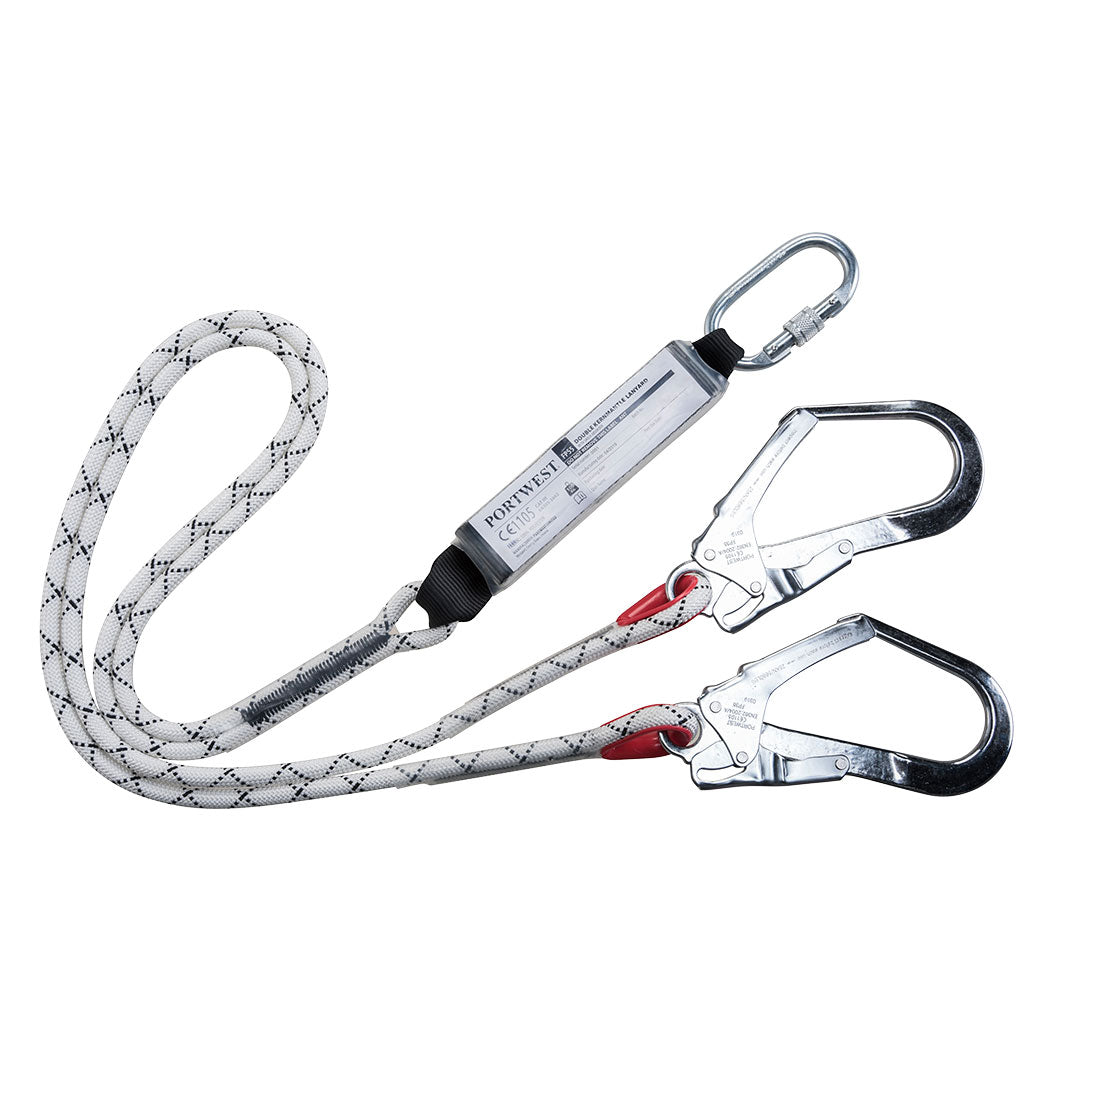 Double Kernmantle 1.8m Lanyard With Shock Absorber